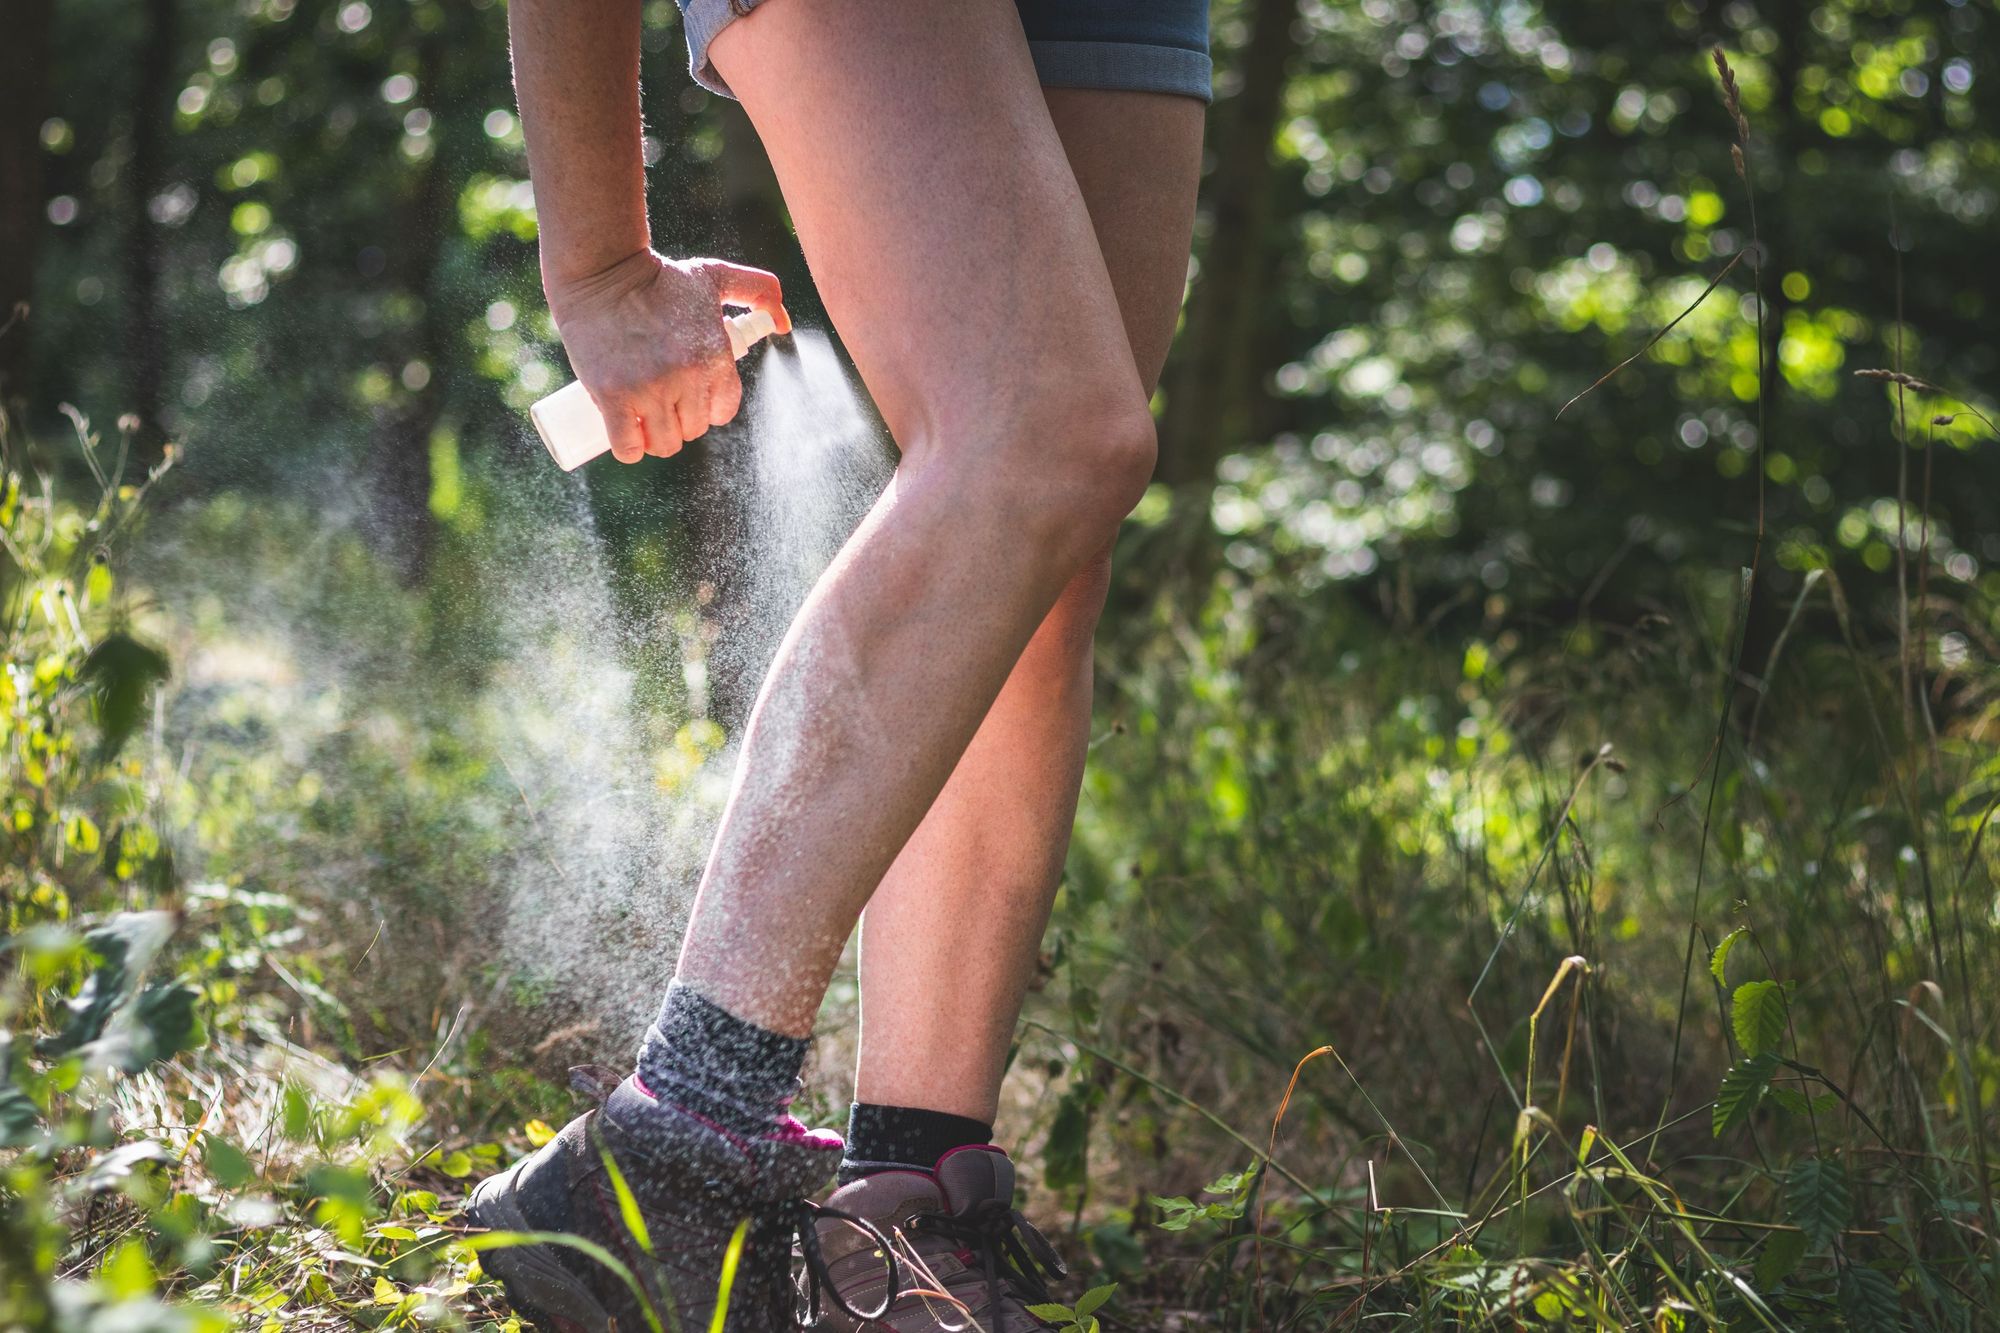 A hiker uses insect repellent to try and fend off ticks. Photo: Getty